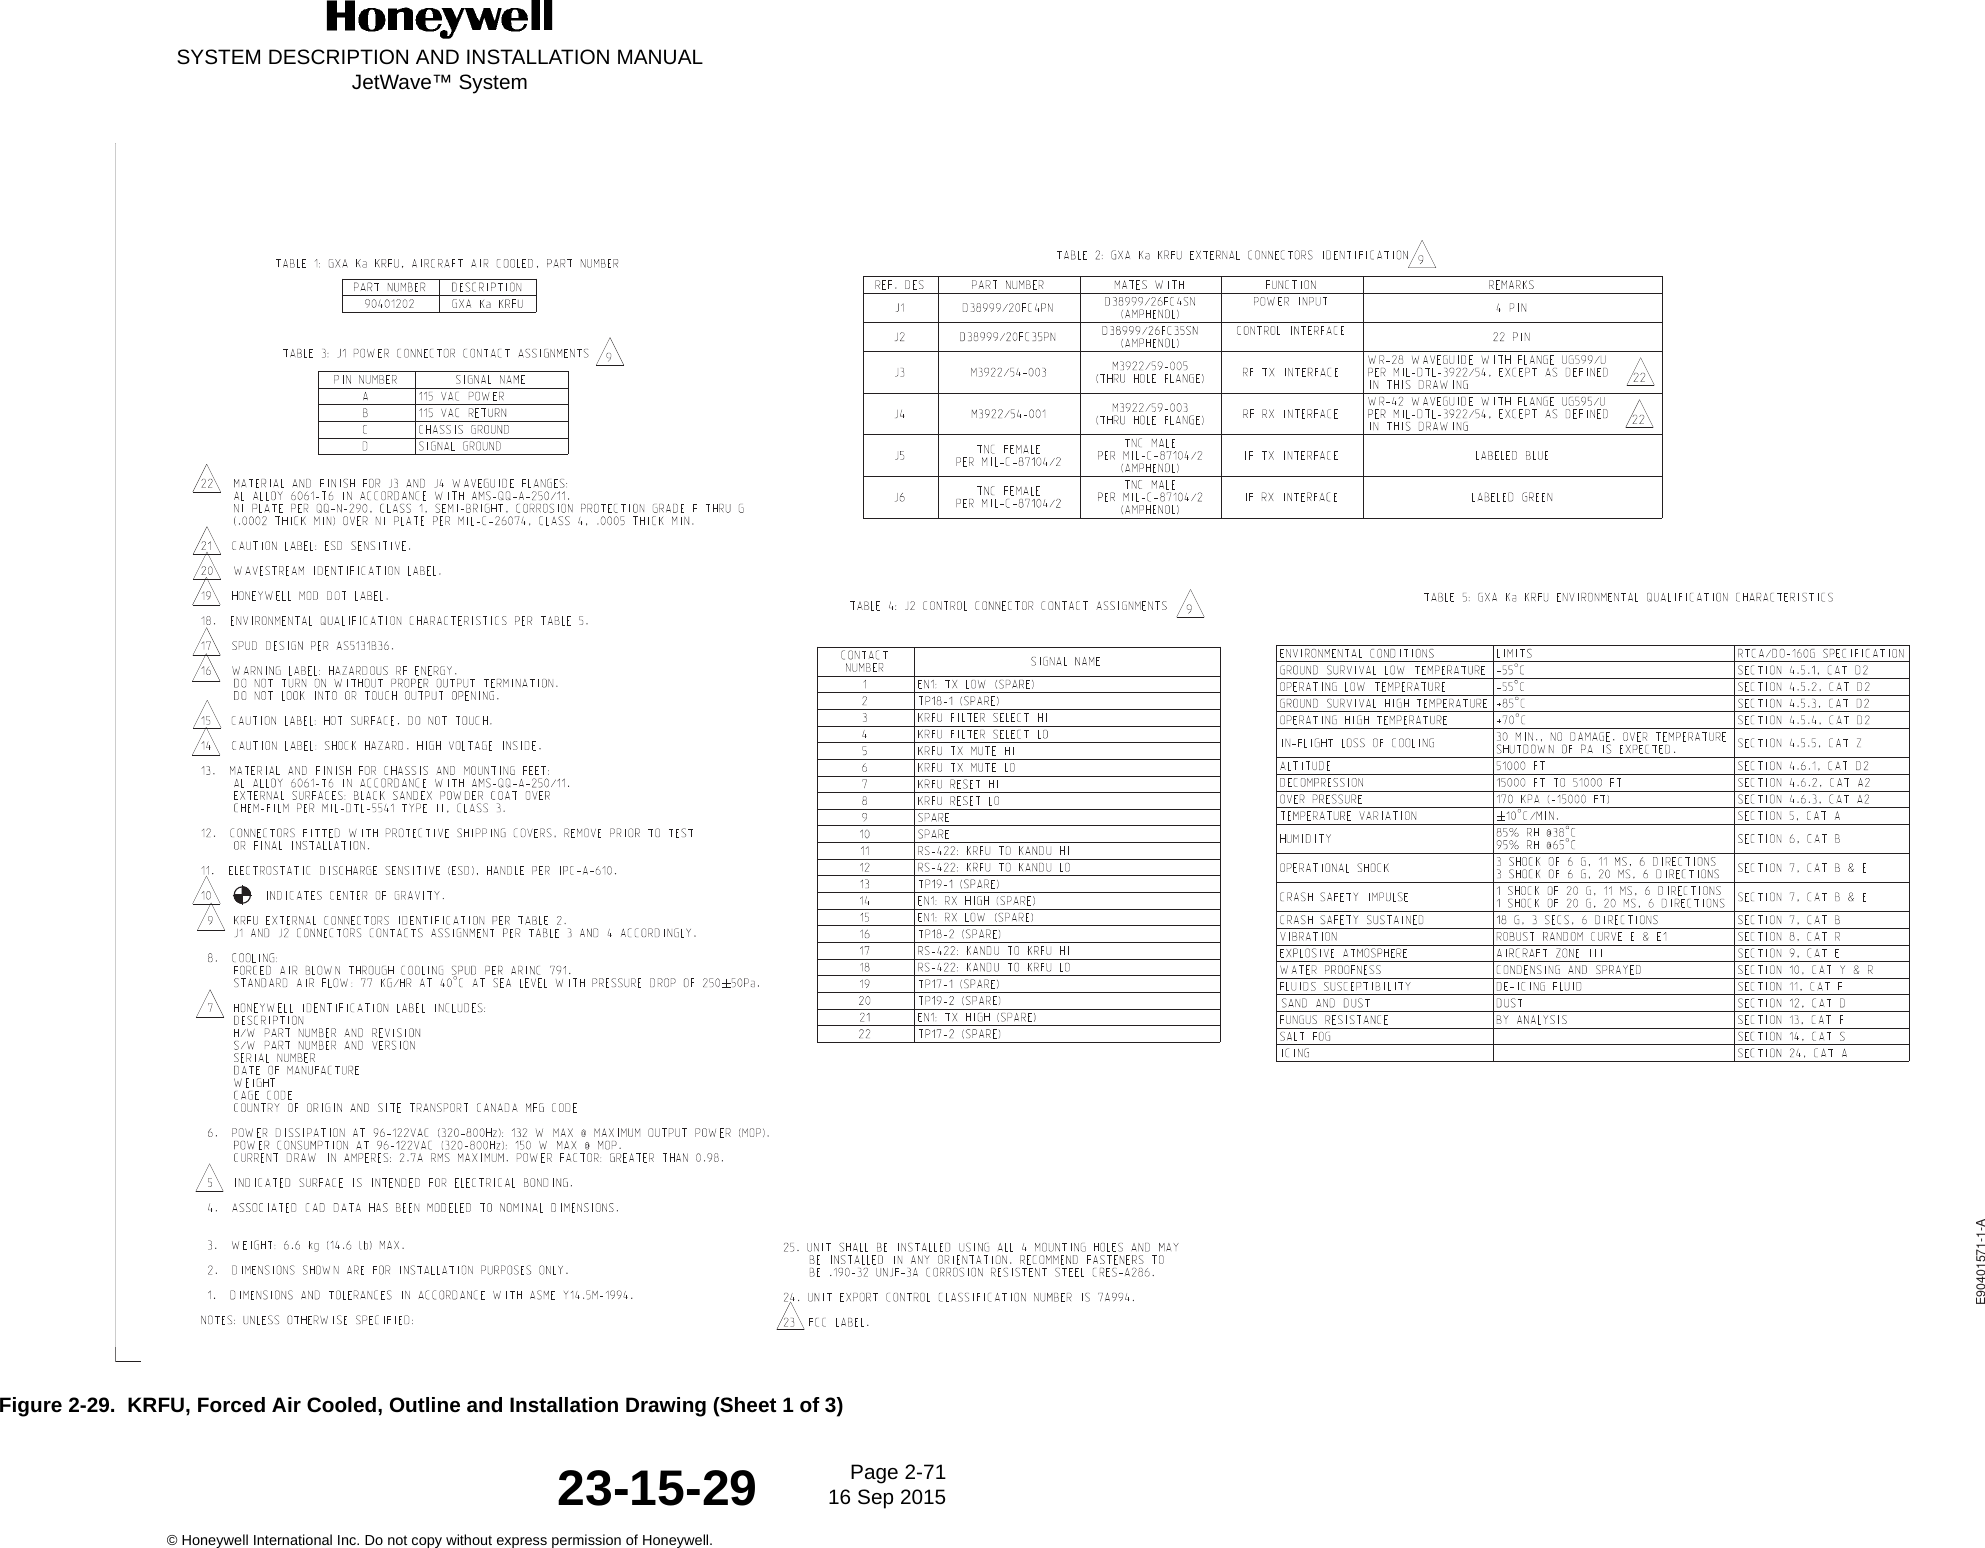 SYSTEM DESCRIPTION AND INSTALLATION MANUALJetWave™ SystemPage 2-71 16 Sep 2015© Honeywell International Inc. Do not copy without express permission of Honeywell.23-15-29Figure 2-29.  KRFU, Forced Air Cooled, Outline and Installation Drawing (Sheet 1 of 3)PRODUCTION - Release - 14 Aug 2014 12:42:49 MST - Printed on 26 Aug 2014E90401571-1-A